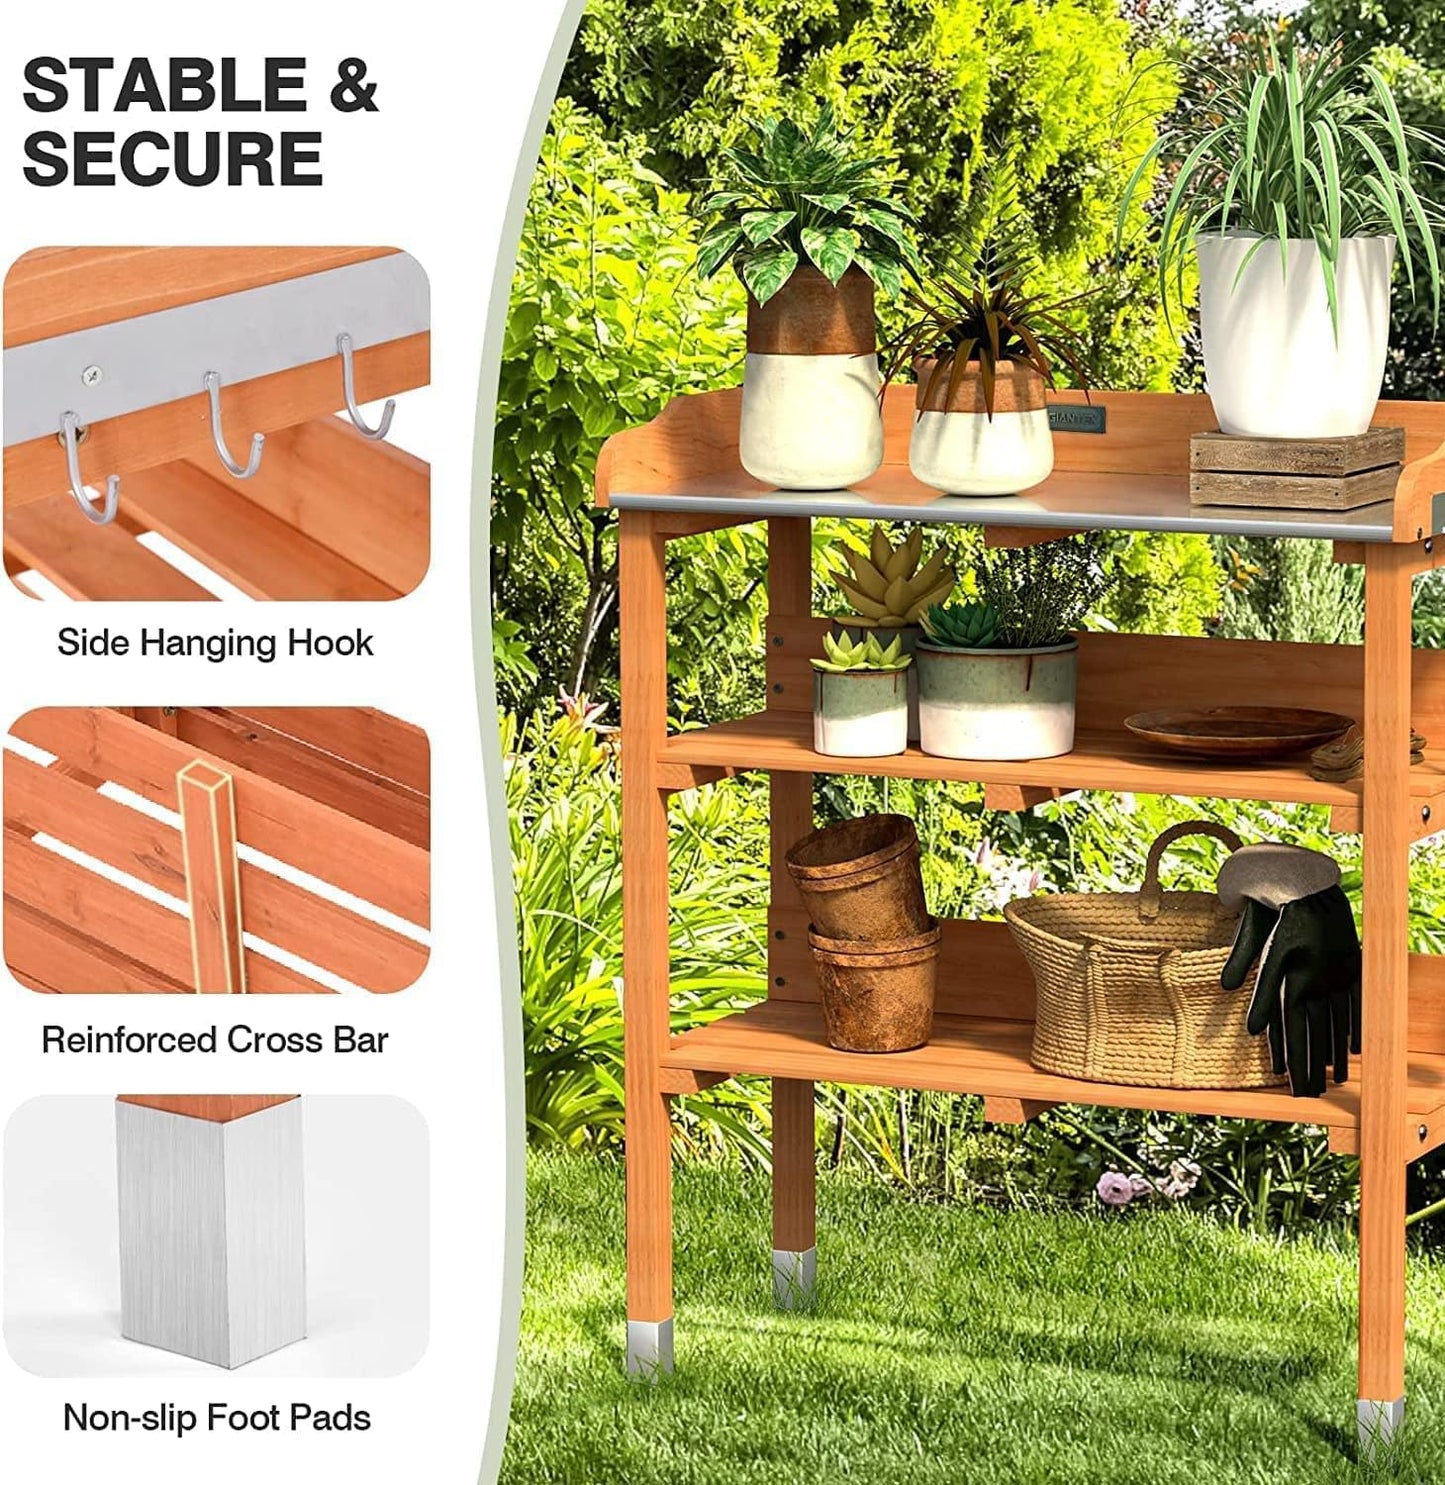 3 Tier Wooden Potting Planting Outdoor Garden Work Bench Table Station With Galvanized Top HYGRAD BUILT TO SURVIVE